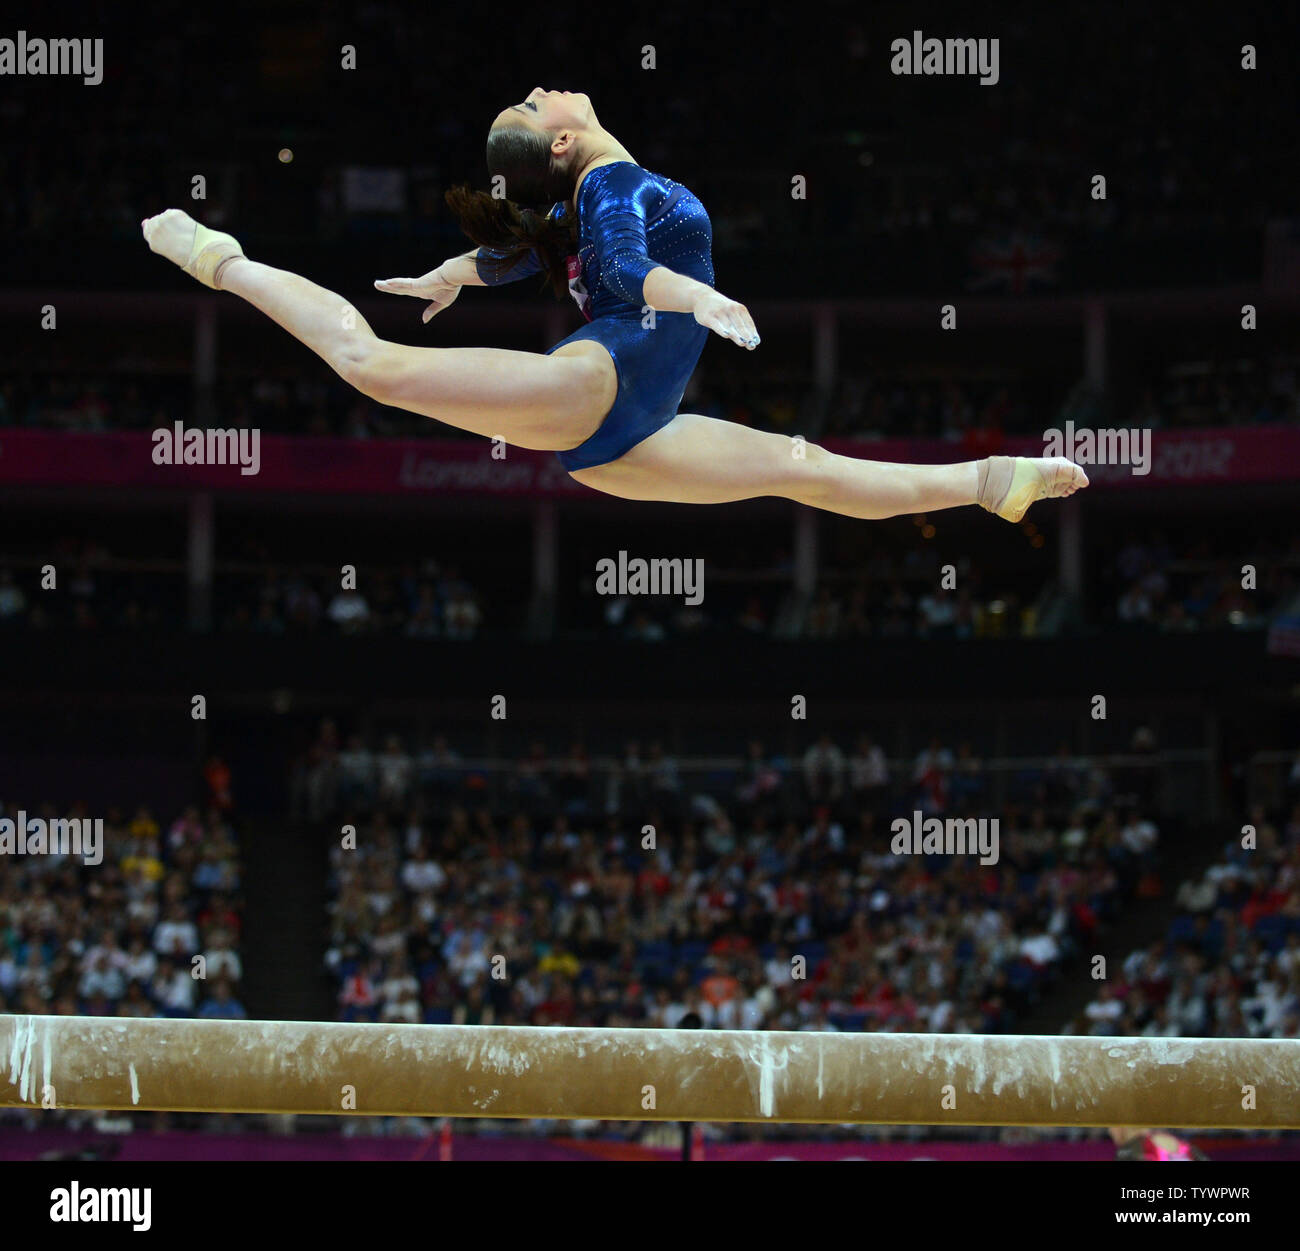 Russia S Aliya Mustafina Flies In The Air In Her Routine On The